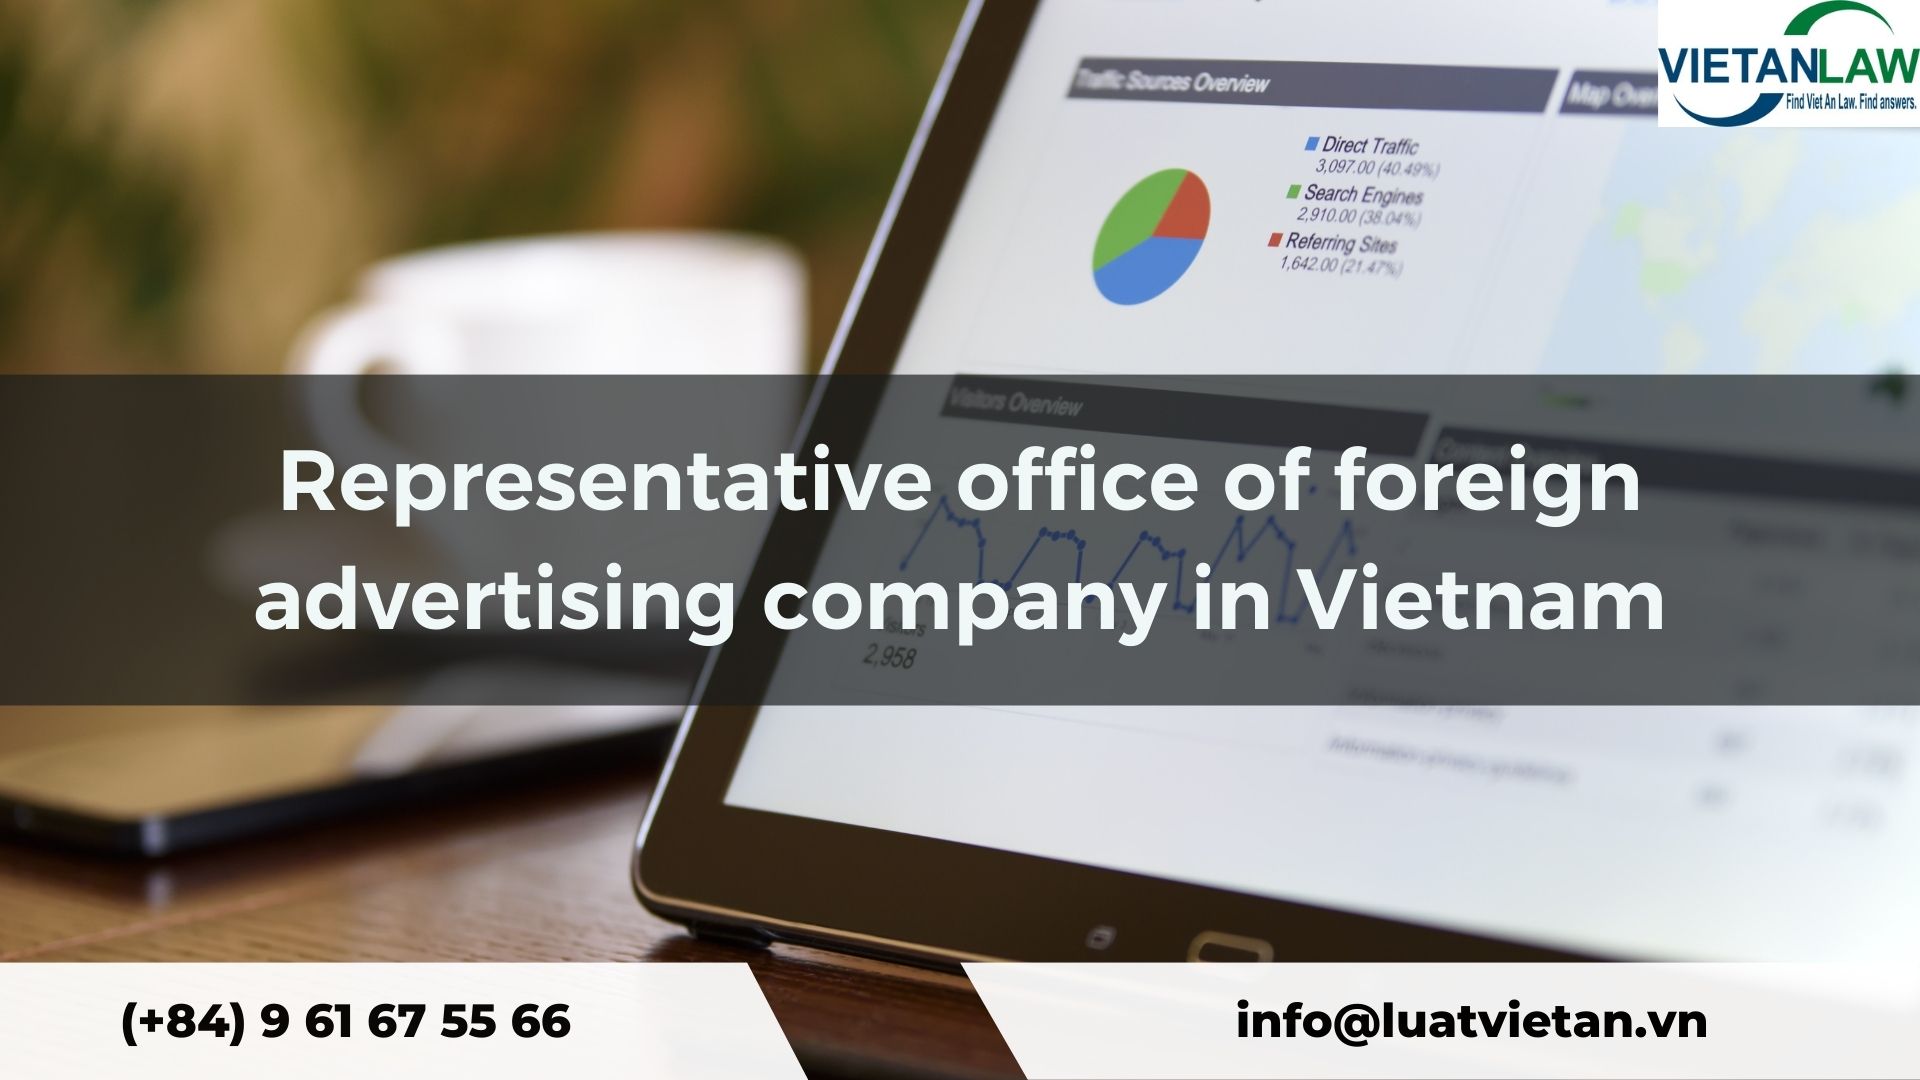 Representative office of foreign advertising company in Vietnam